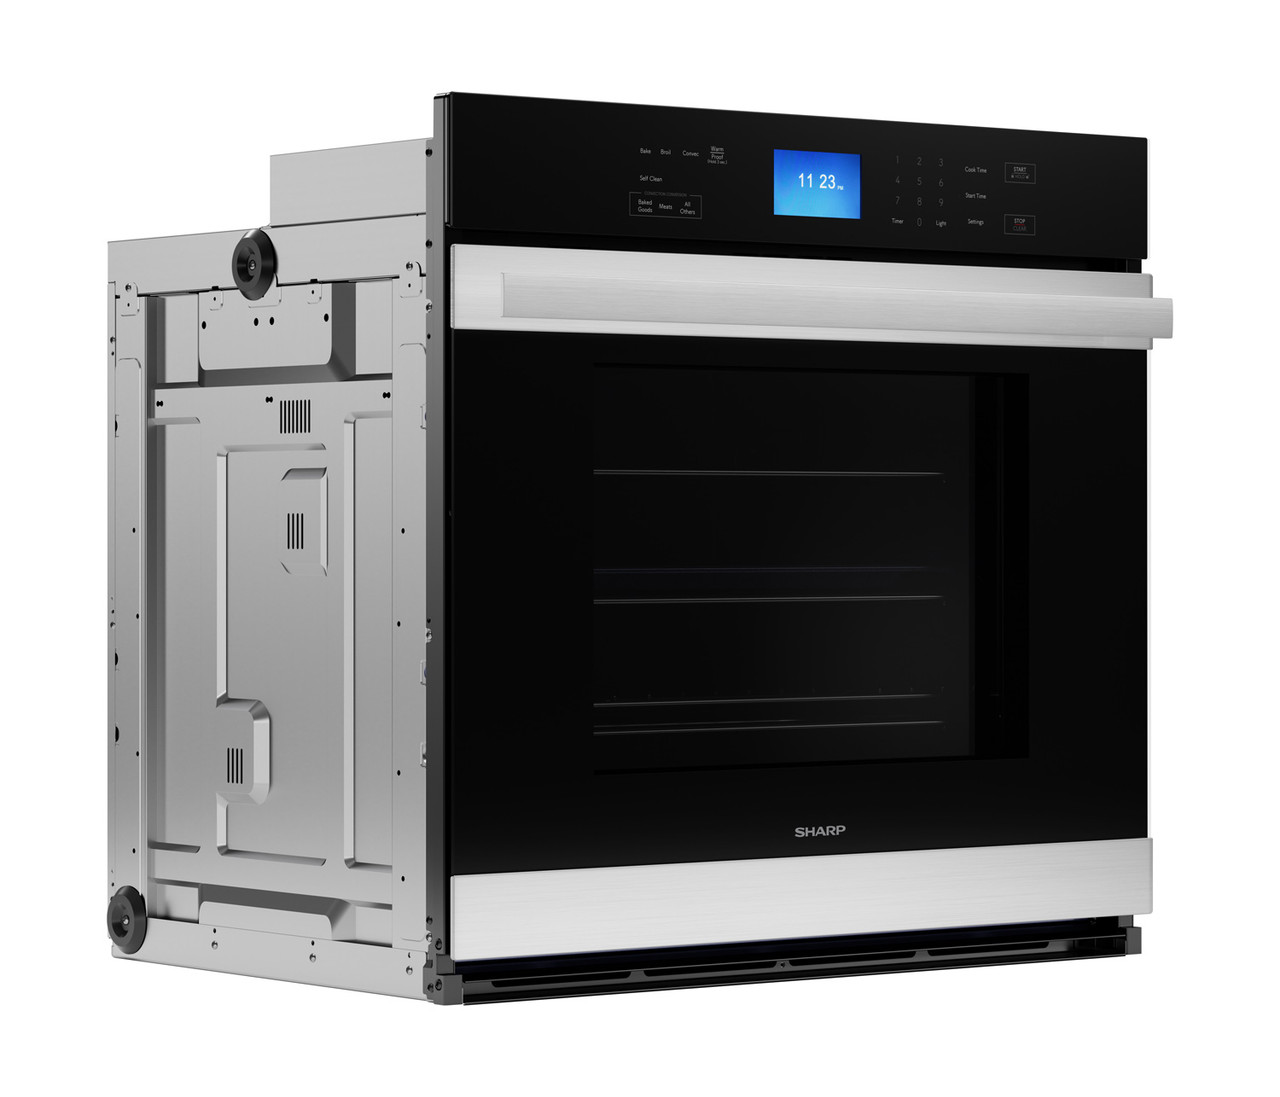 Stainless Steel European Convection Built-In Single Wall Oven (SWA3062GS) Right Angle View